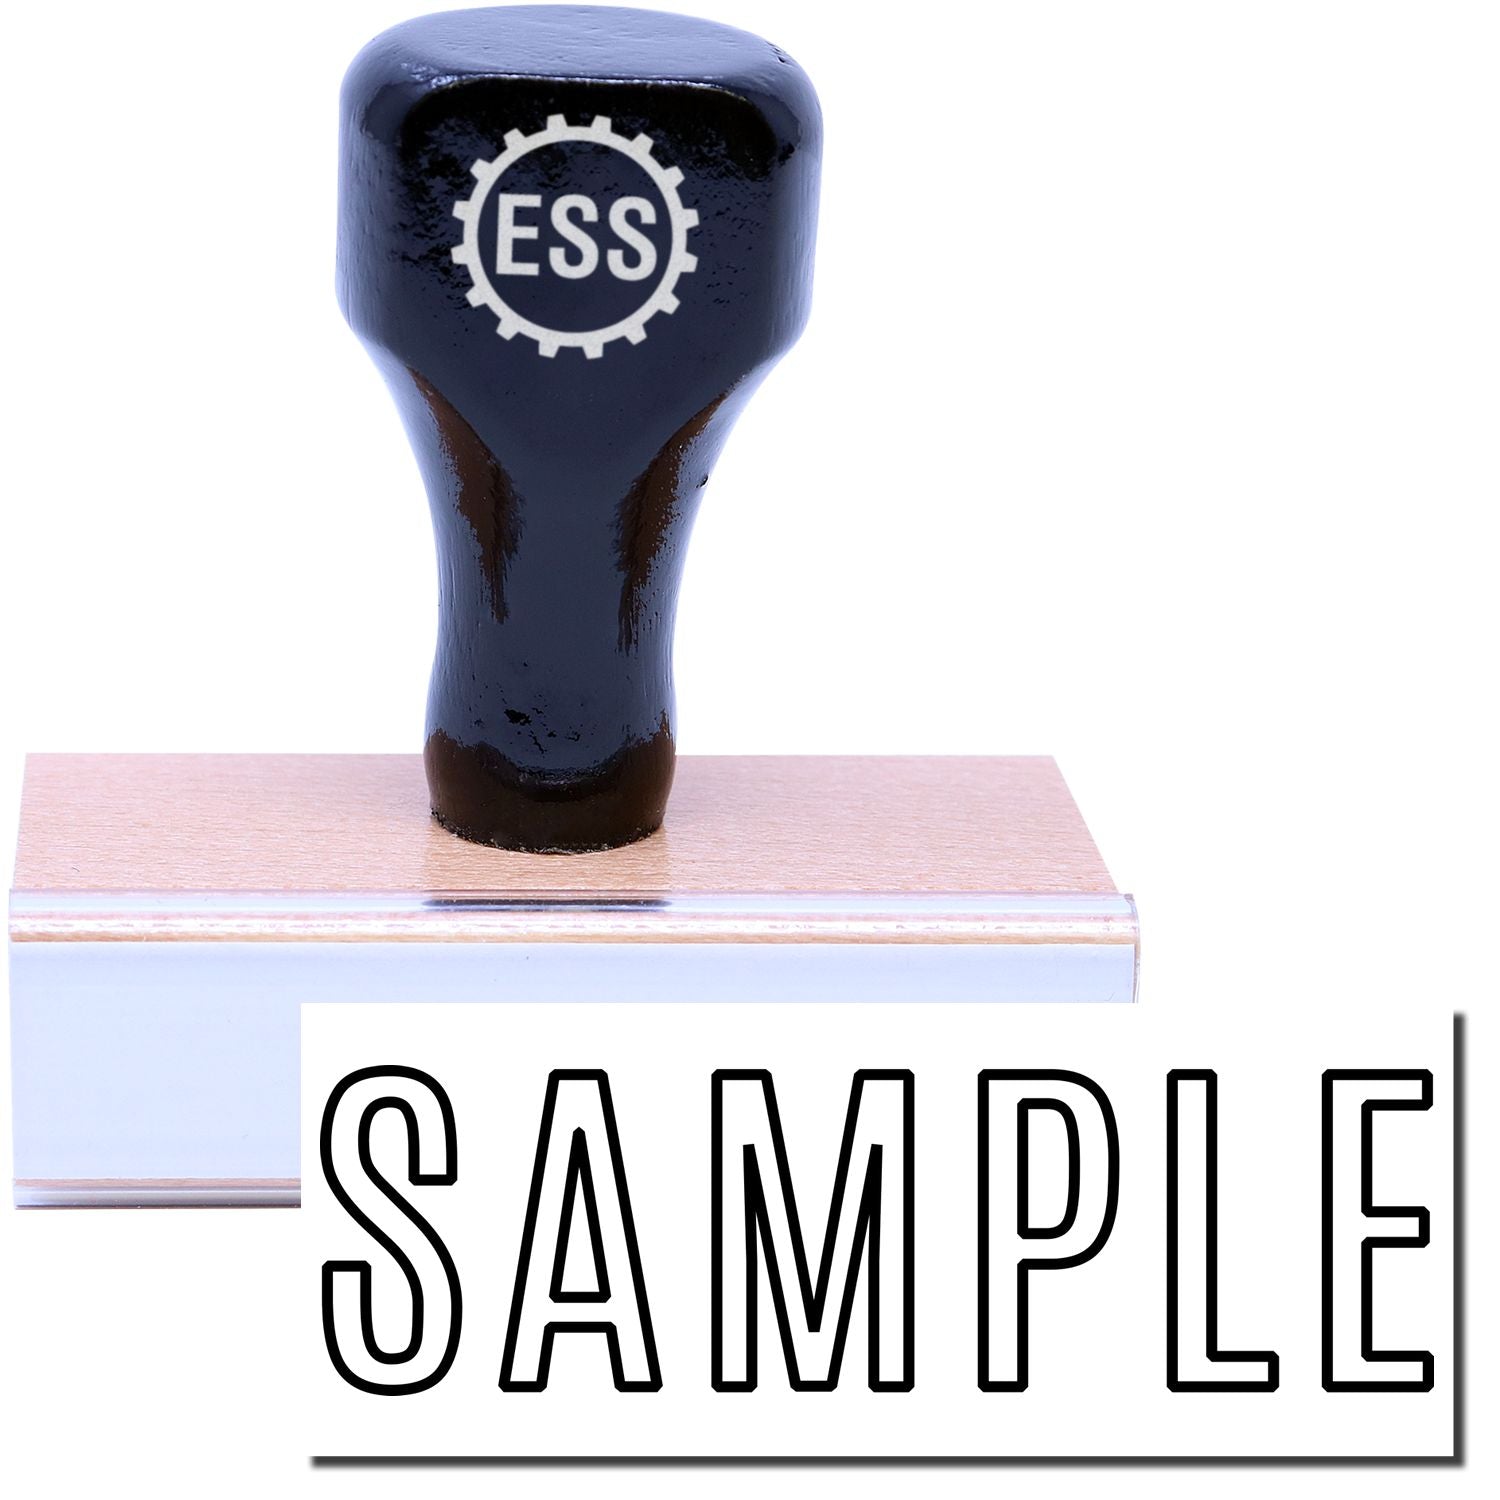 A stock office rubber stamp with a stamped image showing how the text "SAMPLE" in a large outline font is displayed after stamping.